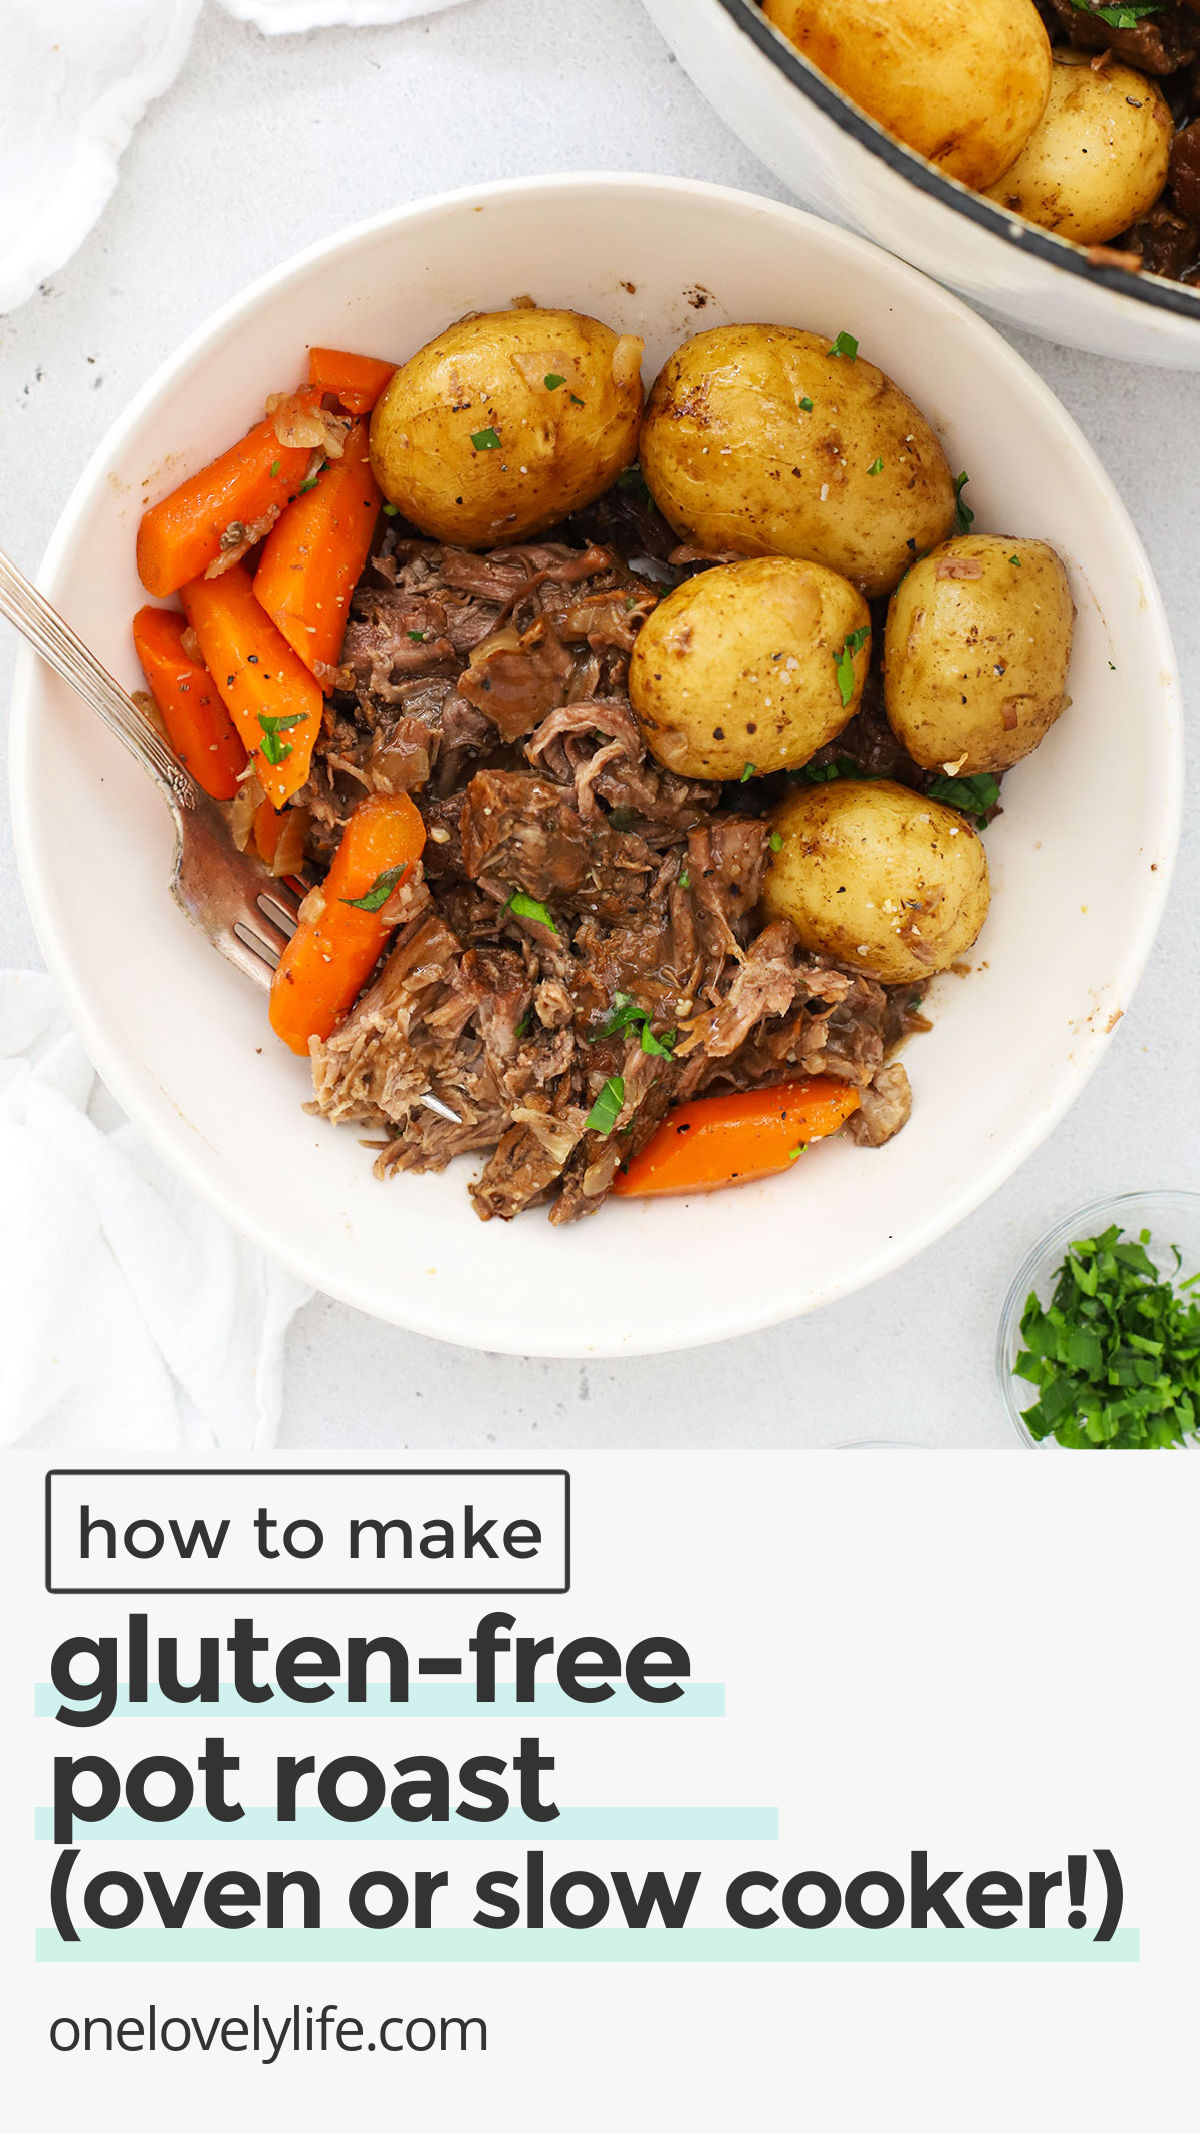 Learn how to make the best gluten-free pot roast in the oven OR slow cooker with this easy recipe! It's nourishing comfort food done right. // slow cooker gluten-free pot roast / dutch oven gluten-free pot roast / gluten-free pot roast recipe / easy gluten-free pot roast / gluten-free comfort food / crock pot gluten-free pot roast / crockpot gluten-free pot roast / gluten-free pot roast in the oven / gluten-free pot roast with gravy /